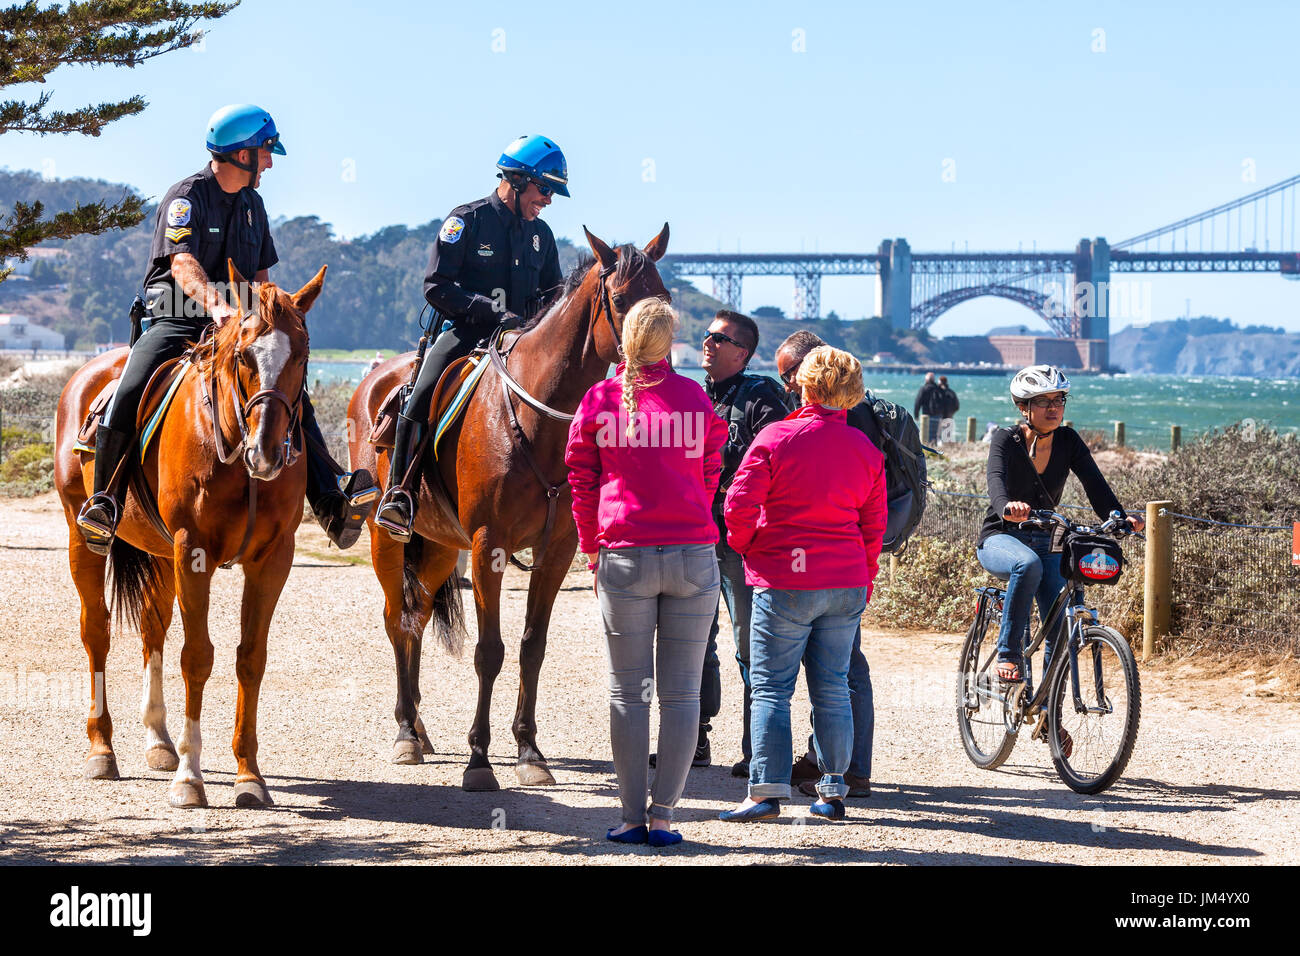 SAN FRANCISCO-SEPT 25, 2013: US Park Police officers greet visitors at the Crissy Field waterfront. Golden Gate Bridge in the background. Stock Photo